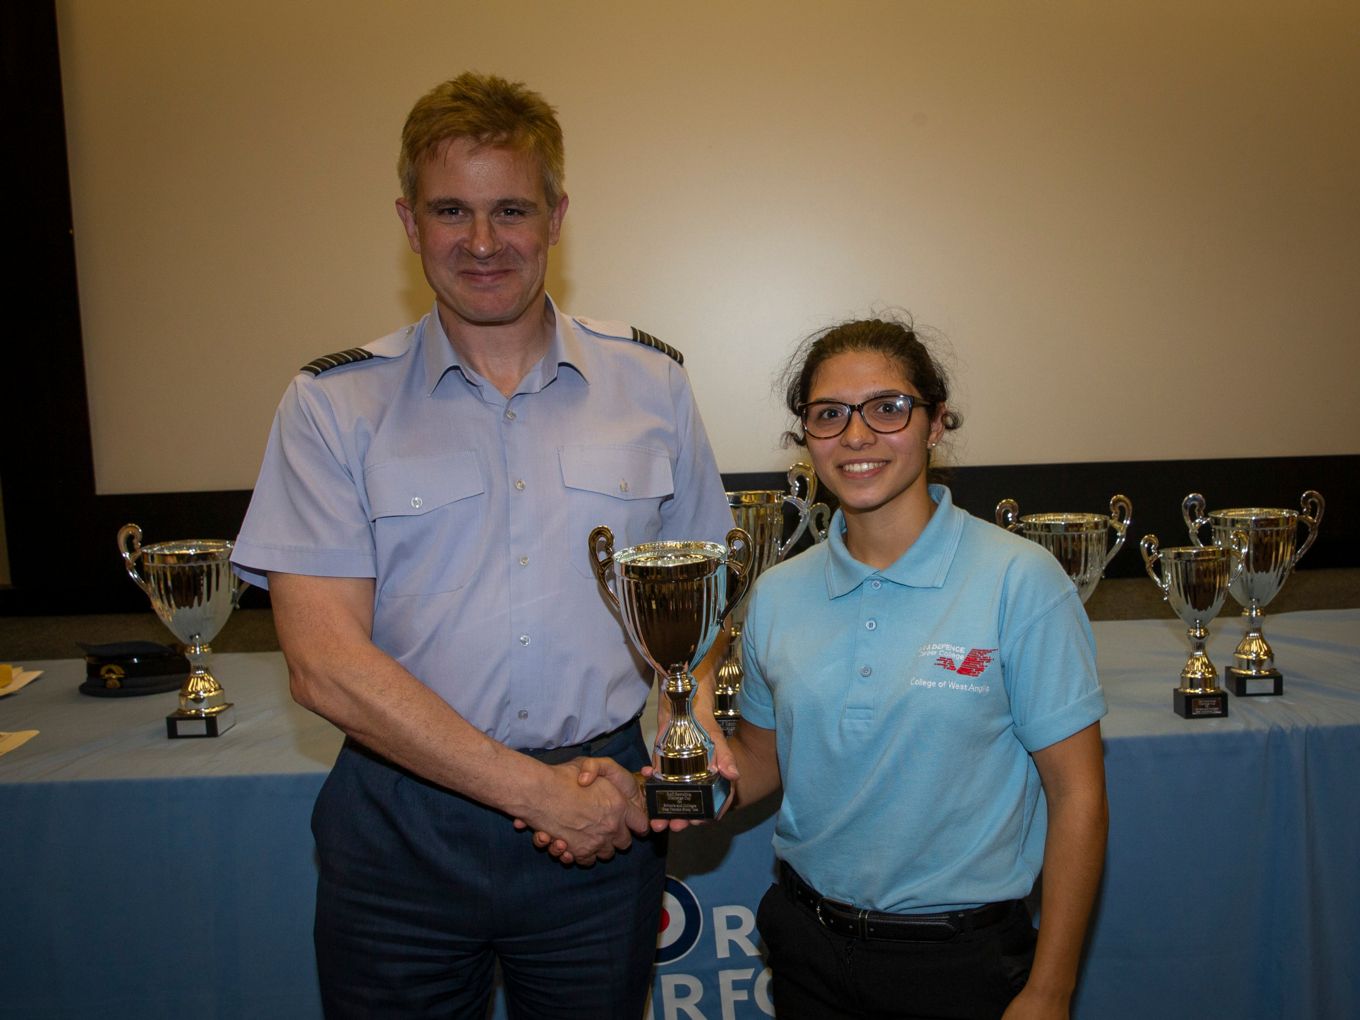 Diana Gonclaves from the College of West Anglia wins best female athlete